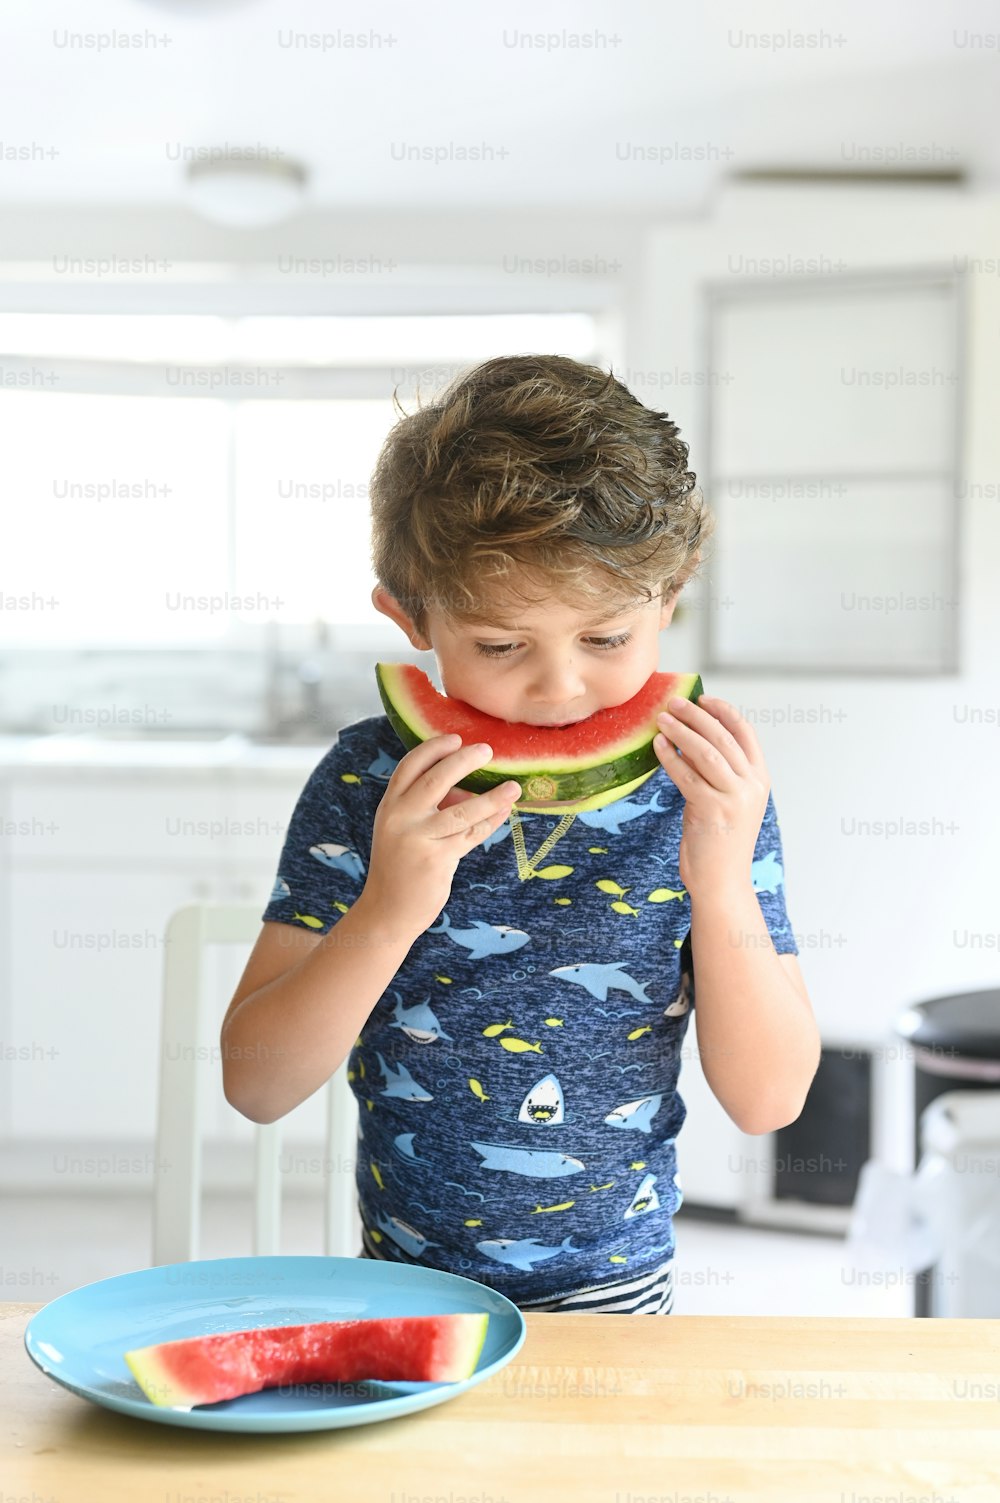 a young boy eating a piece of watermelon